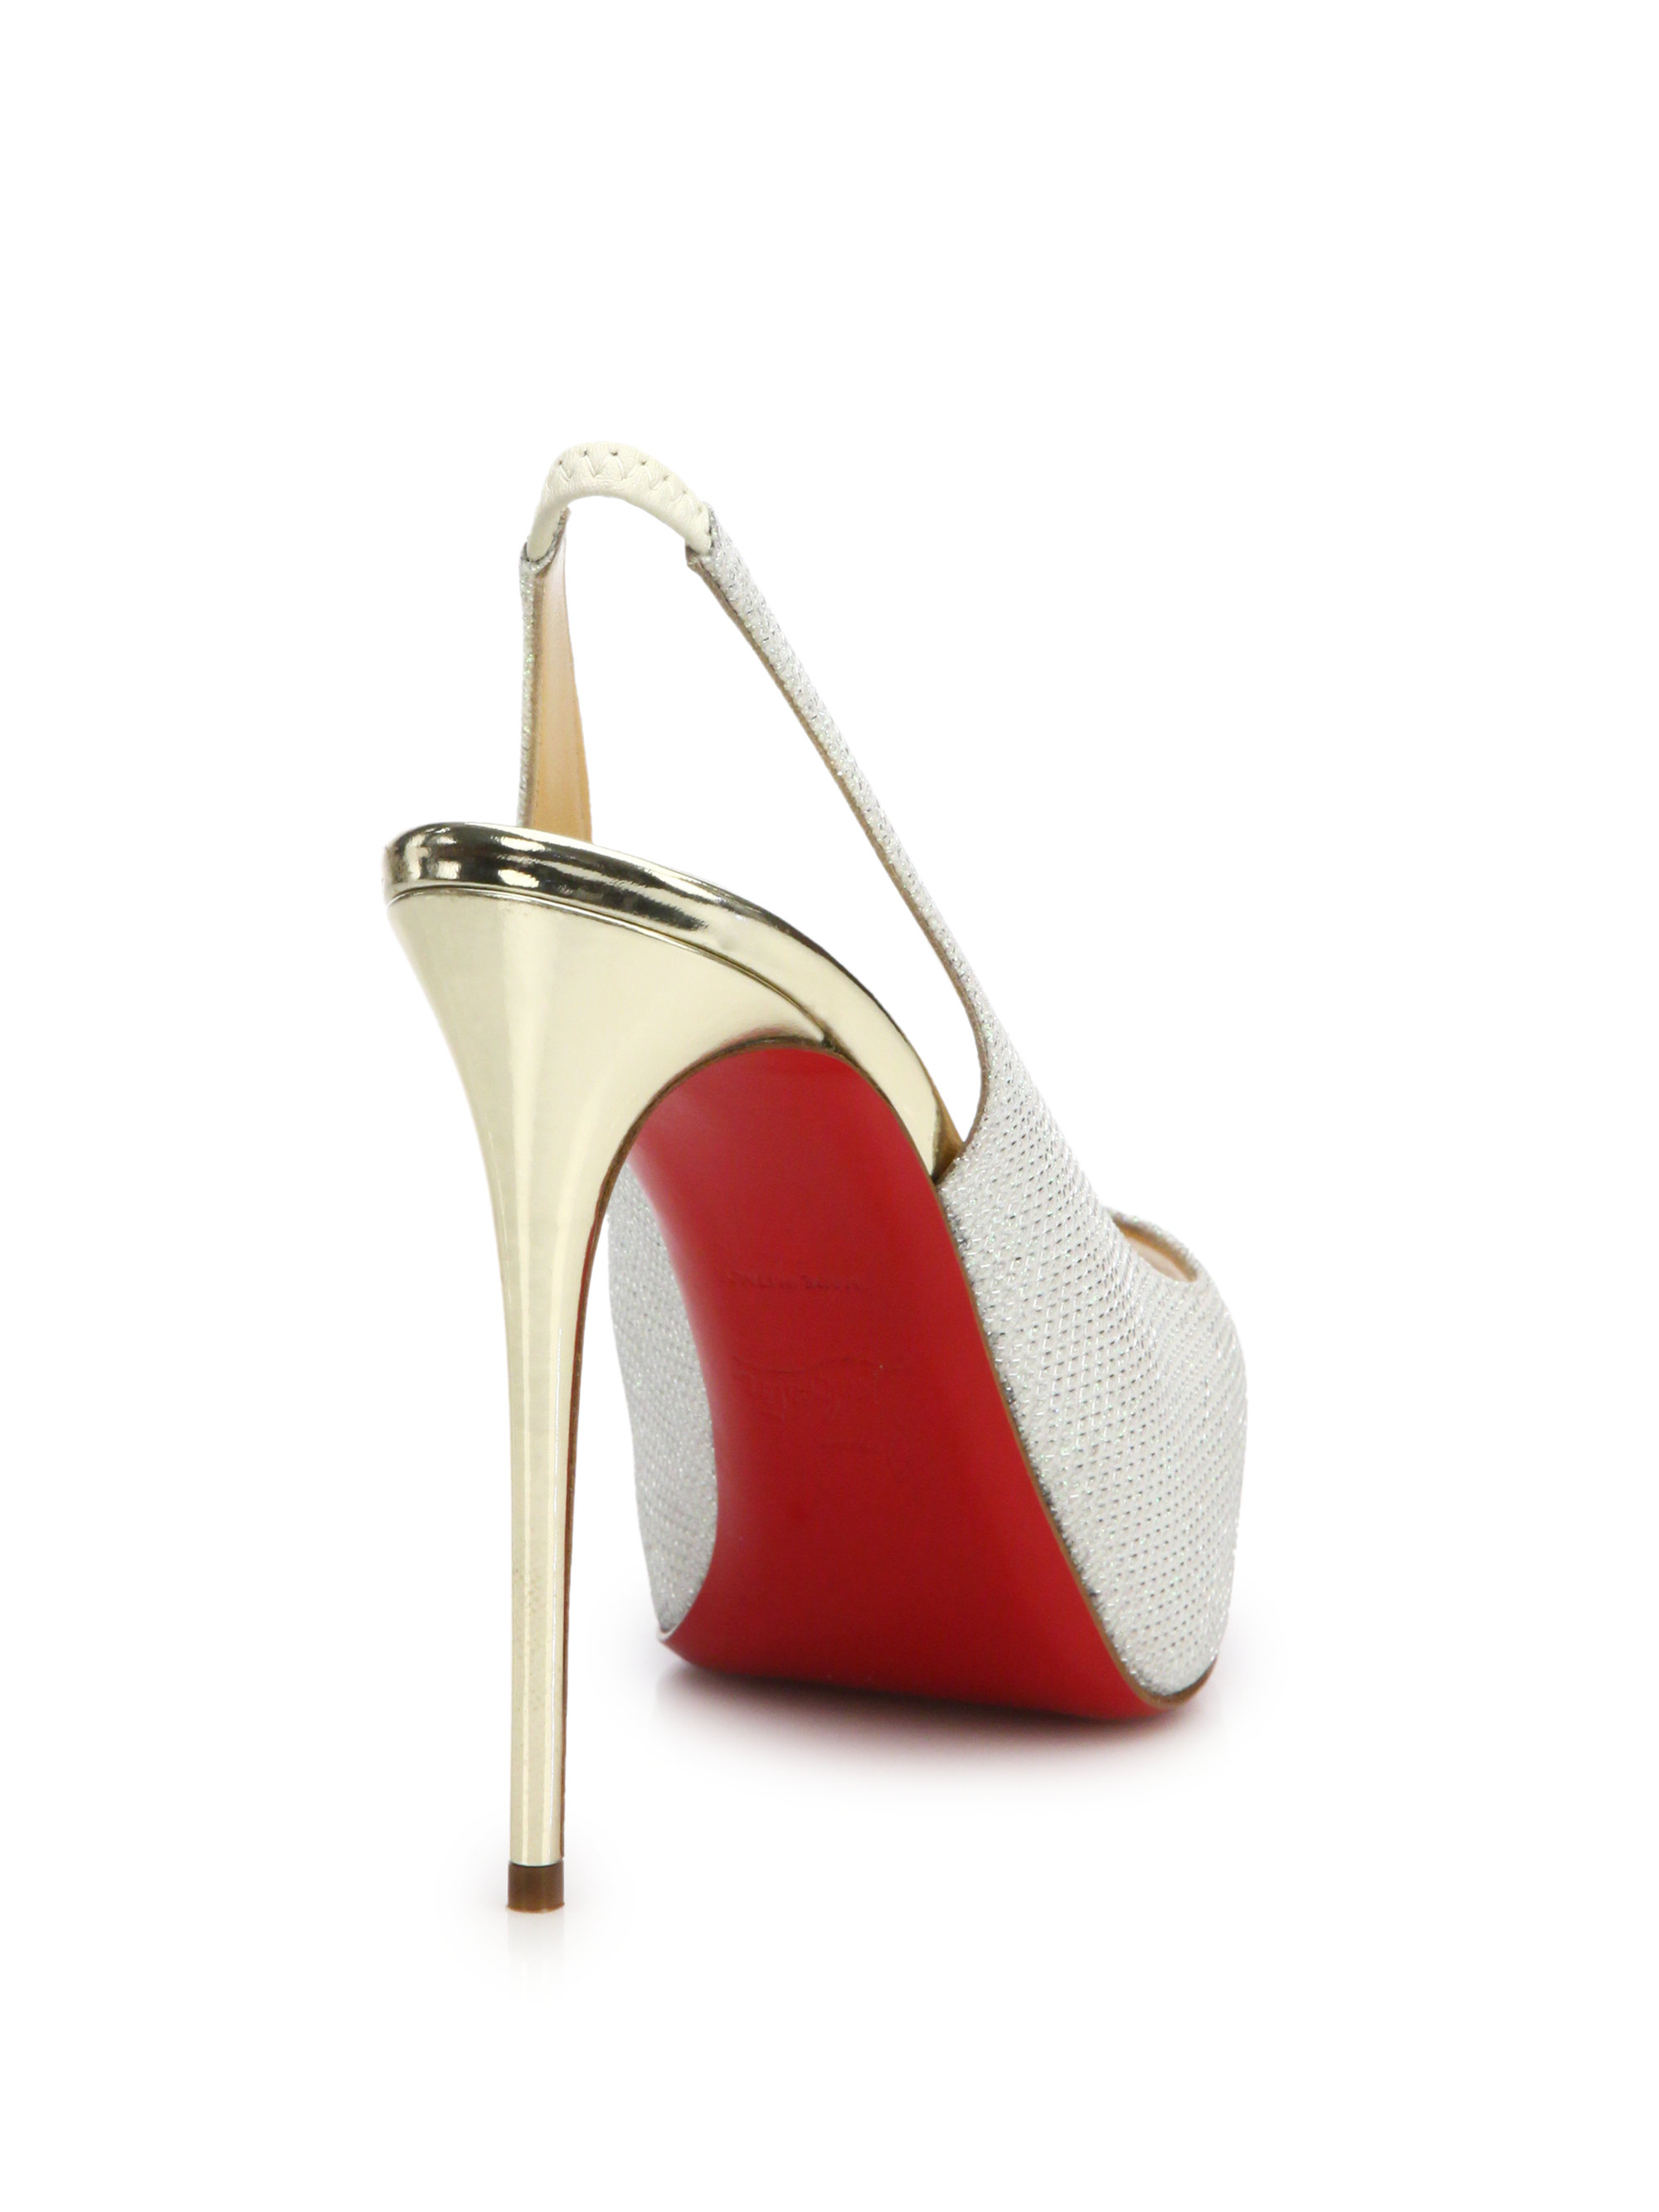 christian louboutin fakes - christian louboutin Private Number slingback pumps Blue and white ...